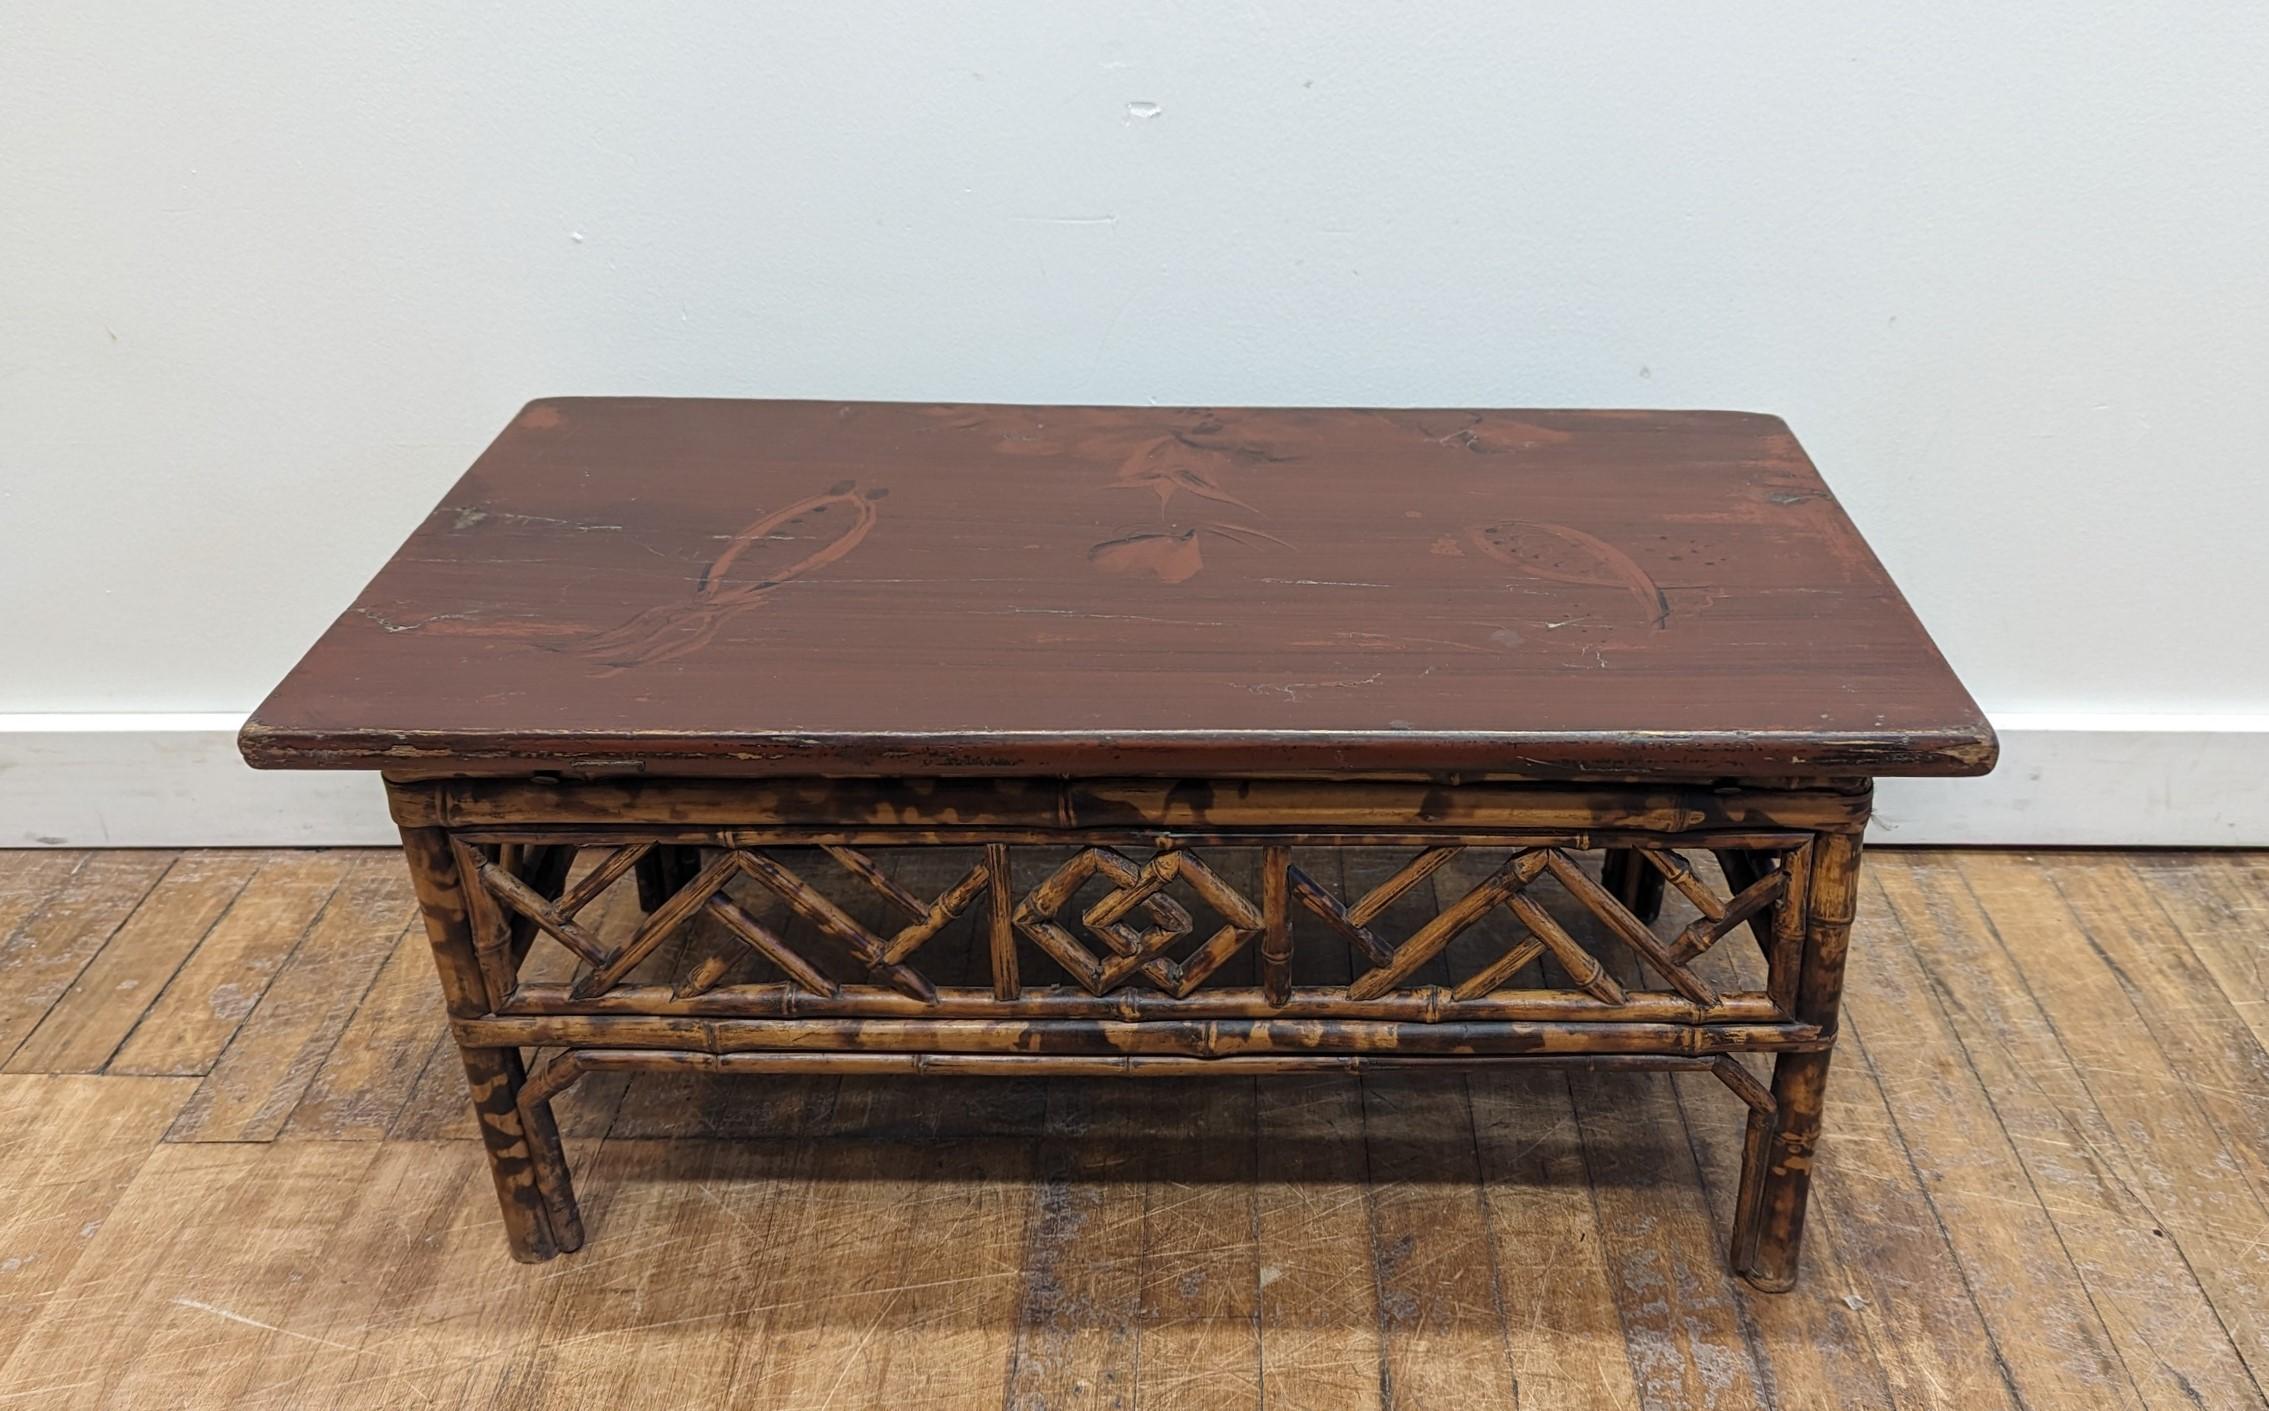 Bamboo Kang Table of the Qing Dynasty period.  Speckled Bamboo low Kang Table wonderfully constructed with fretted apron stretchers and struts.  A double happiness symbol is centered on the aprons of both sides with an abstract floral image in the